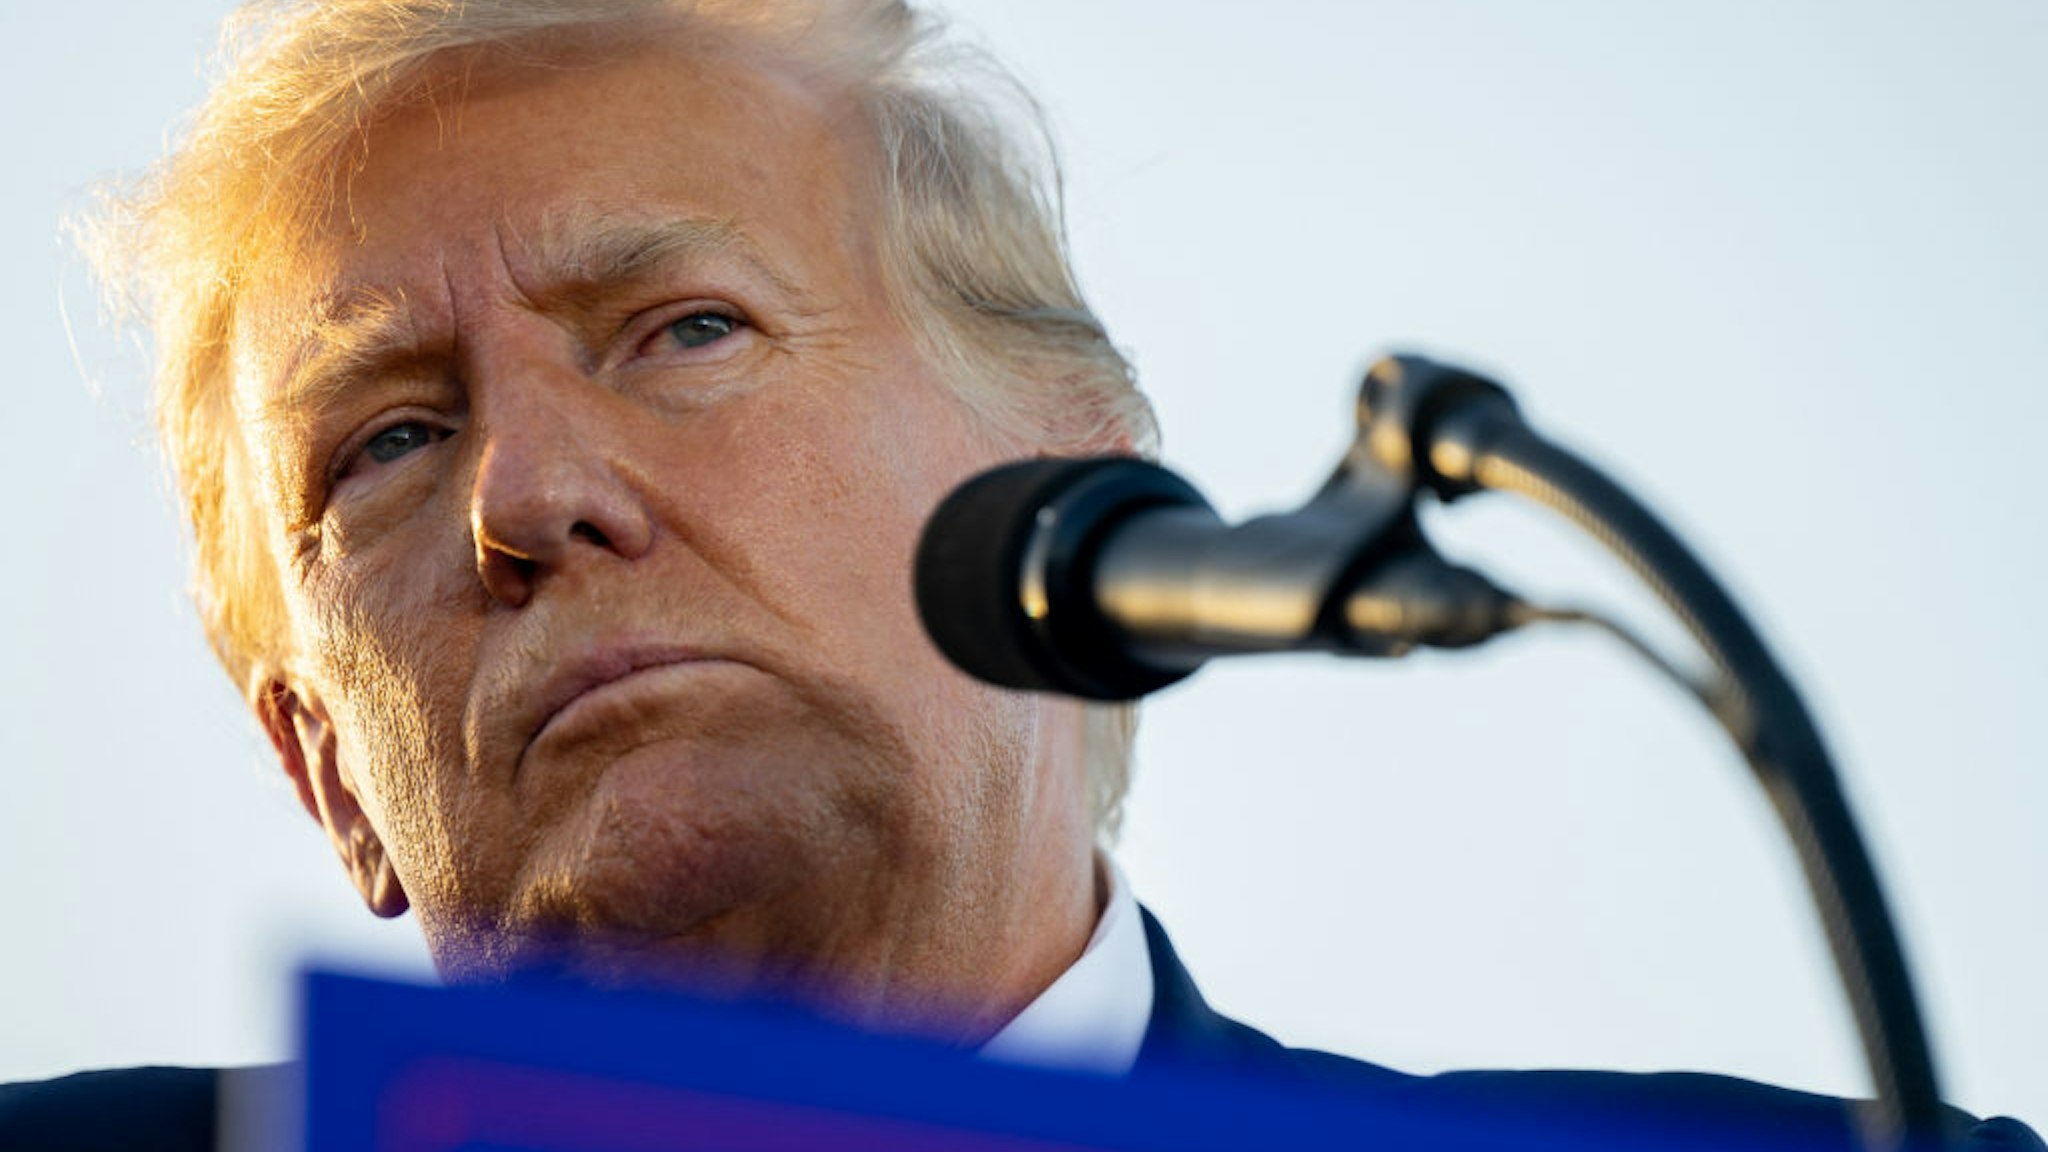 WACO, TEXAS - MARCH 25: Former U.S. President Donald Trump speaks during a rally at the Waco Regional Airport on March 25, 2023 in Waco, Texas. Former U.S. president Donald Trump attended and spoke at his first rally since announcing his 2024 presidential campaign. Today in Waco also marks the 30 year anniversary of the weeks deadly standoff involving Branch Davidians and federal law enforcement. 82 Davidians were killed, and four agents left dead. (Photo by Brandon Bell/Getty Images)